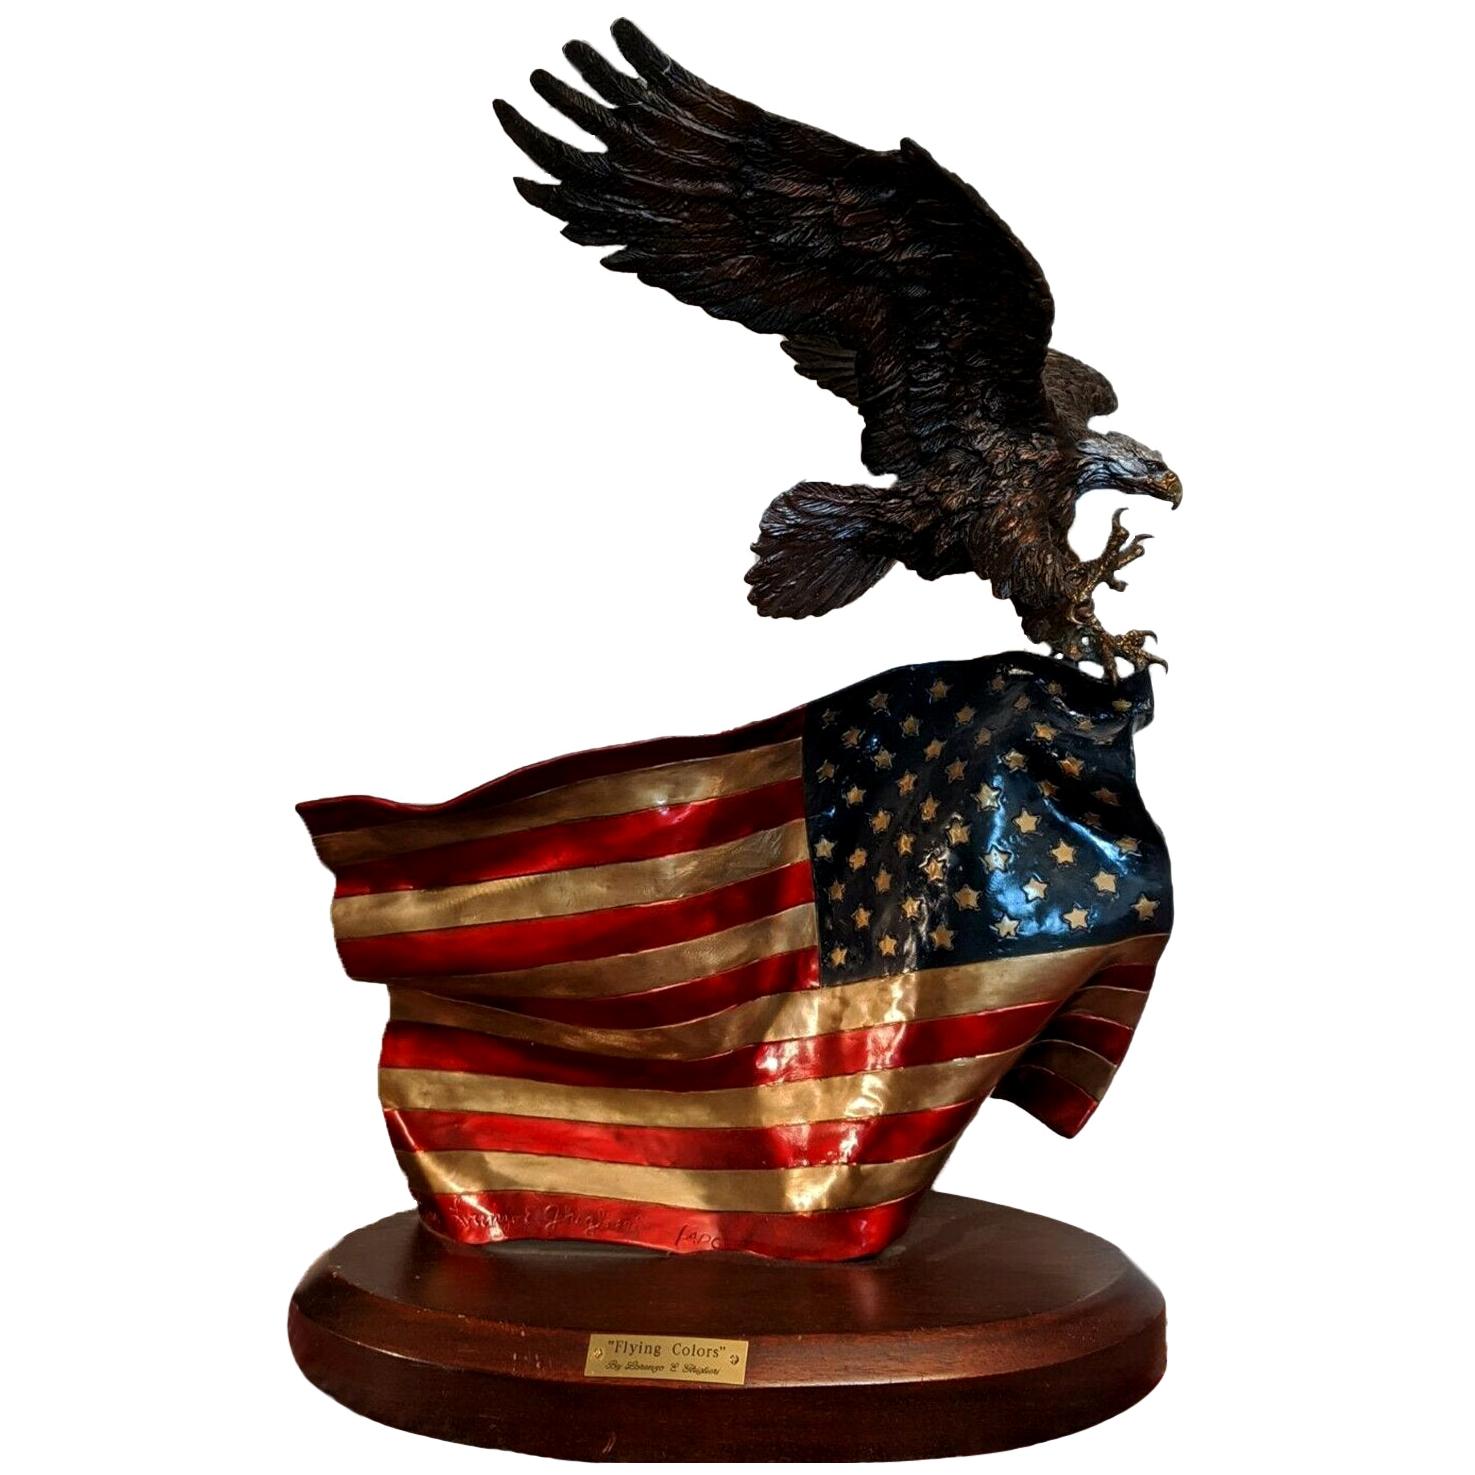 "Flying Colors" Bald Eagle and Flag Bronze Sculpture by Lorenzo Ghiglieri, 2001